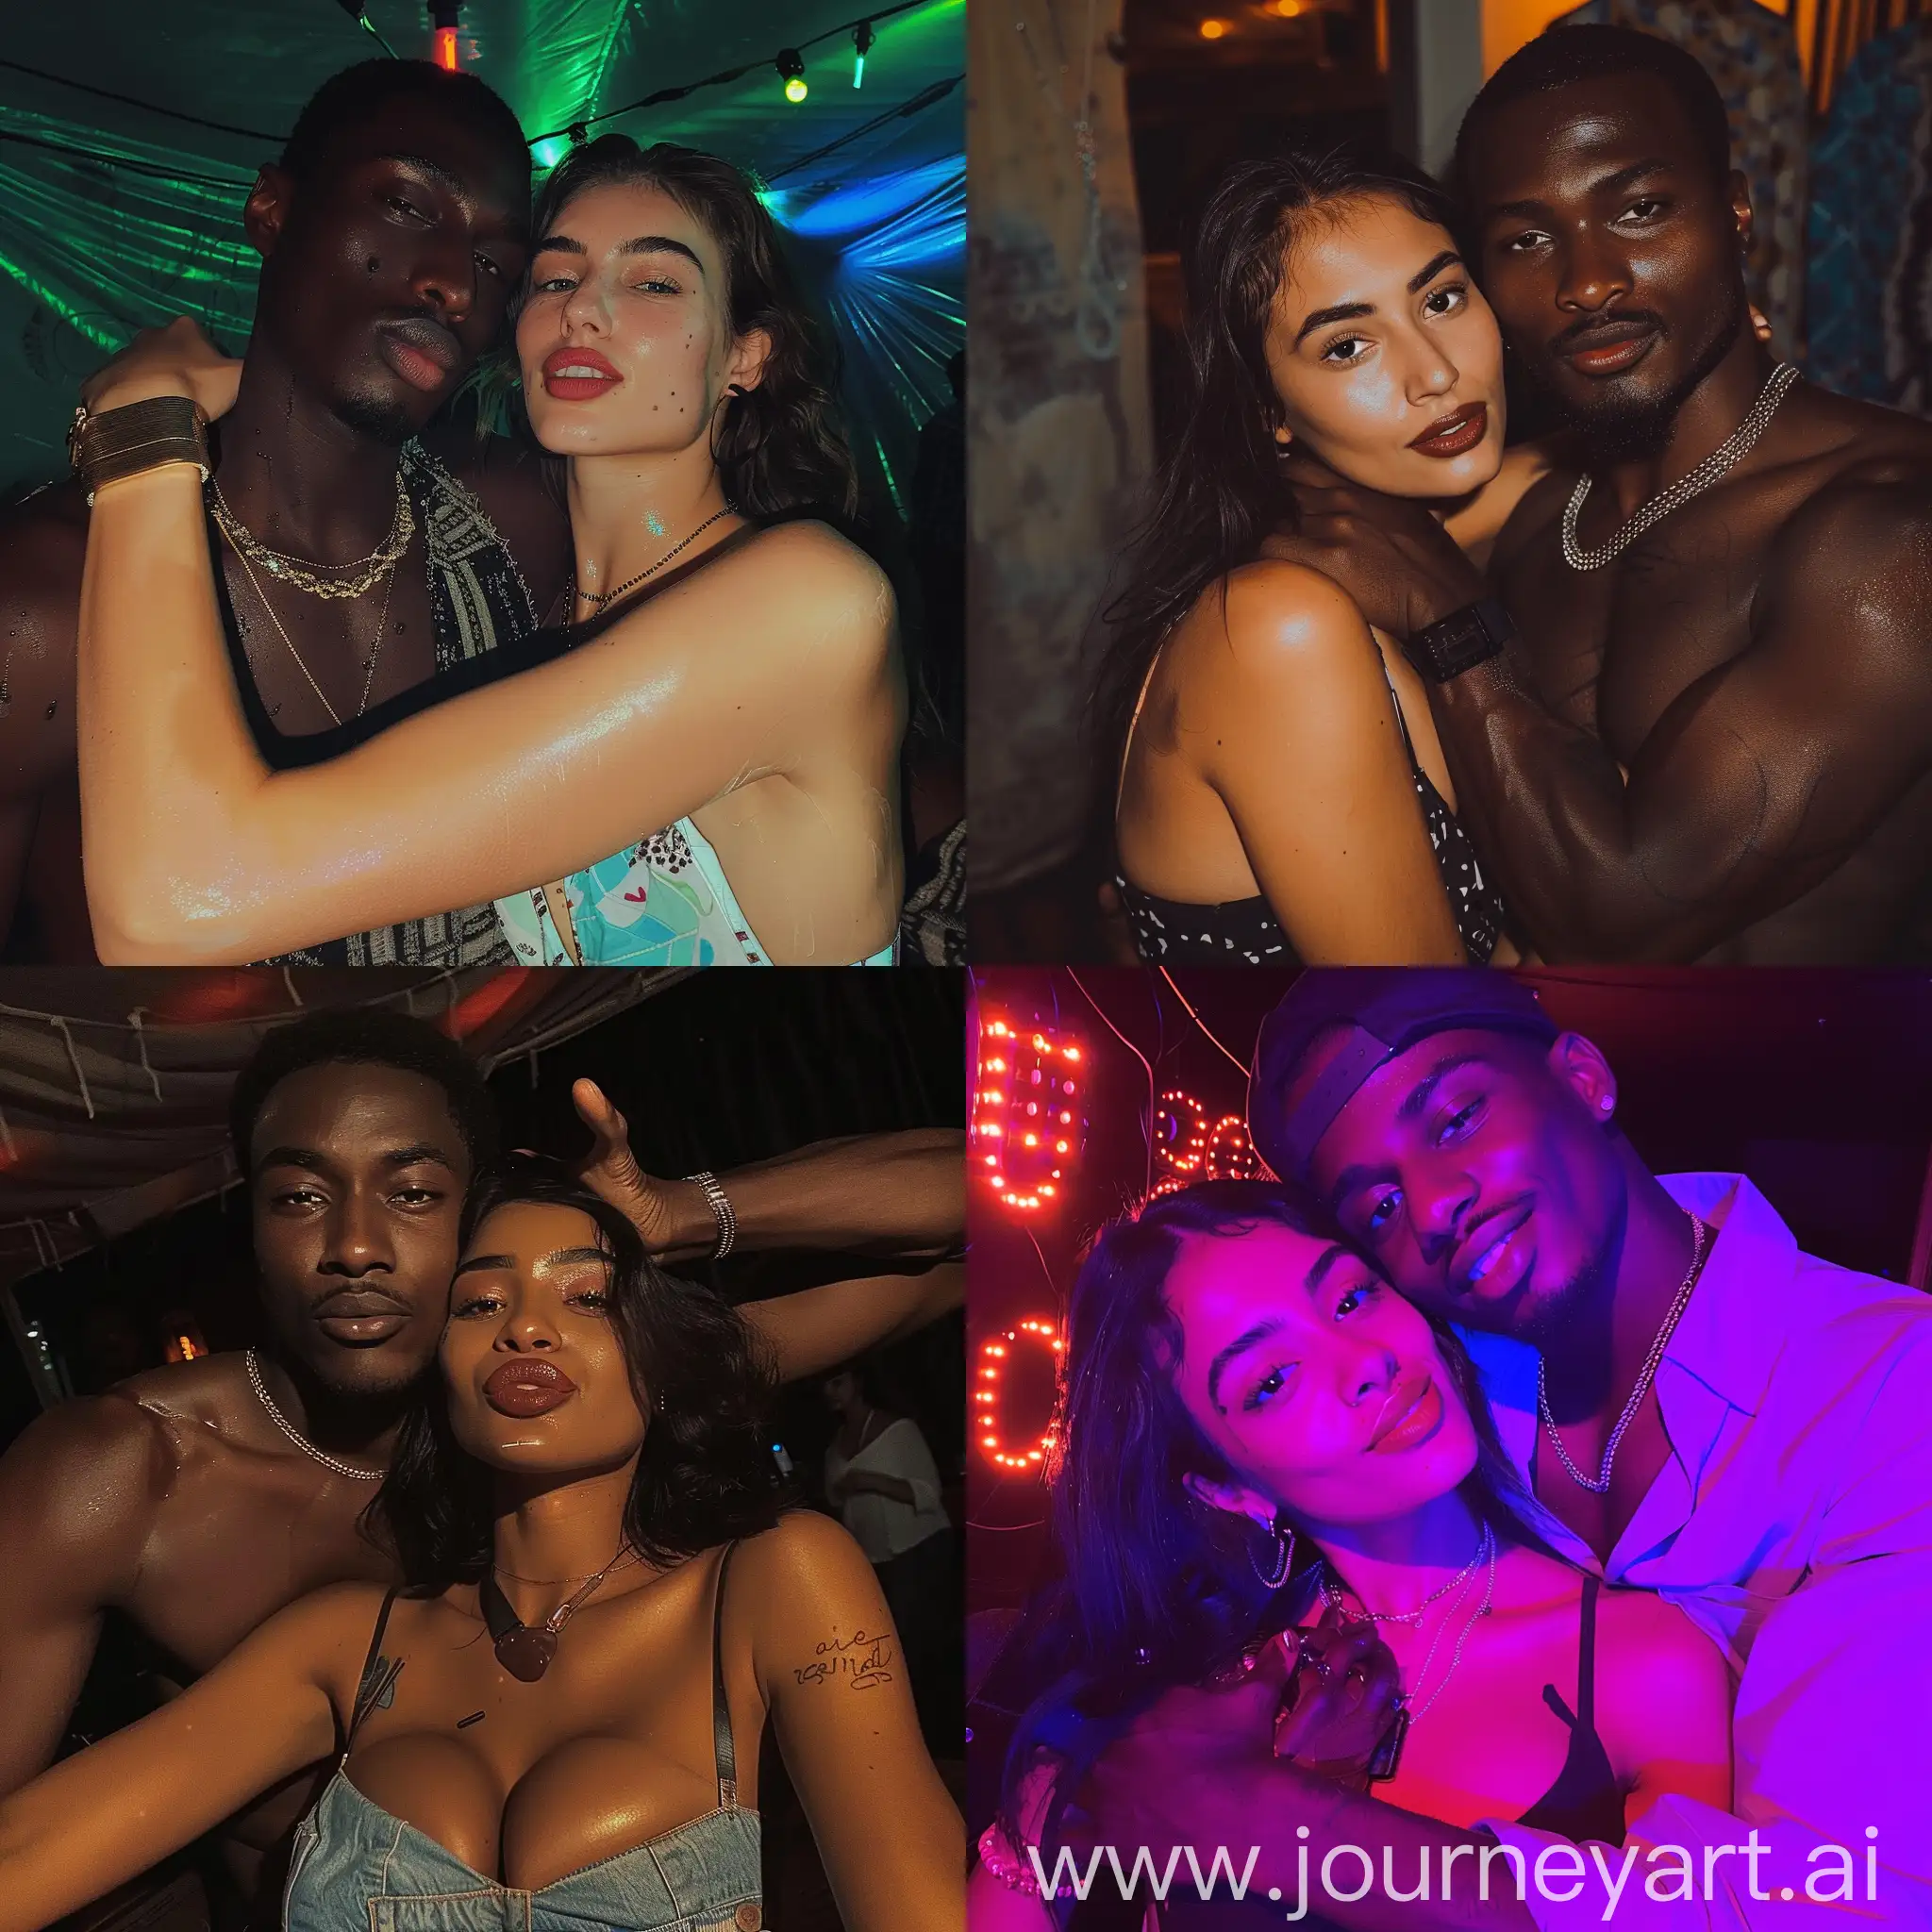 Aesthetic instagram selfie of an iraqi woman in a party club crop-top getting hugged possessively by her tall robust african partner, she looks very iraqi, she is doing the duck lips pose, her partner is grabbing her neck and smiling, the woman looks typically iraqi and is beautiful, both are looking at the camera, sweaty, flirty
